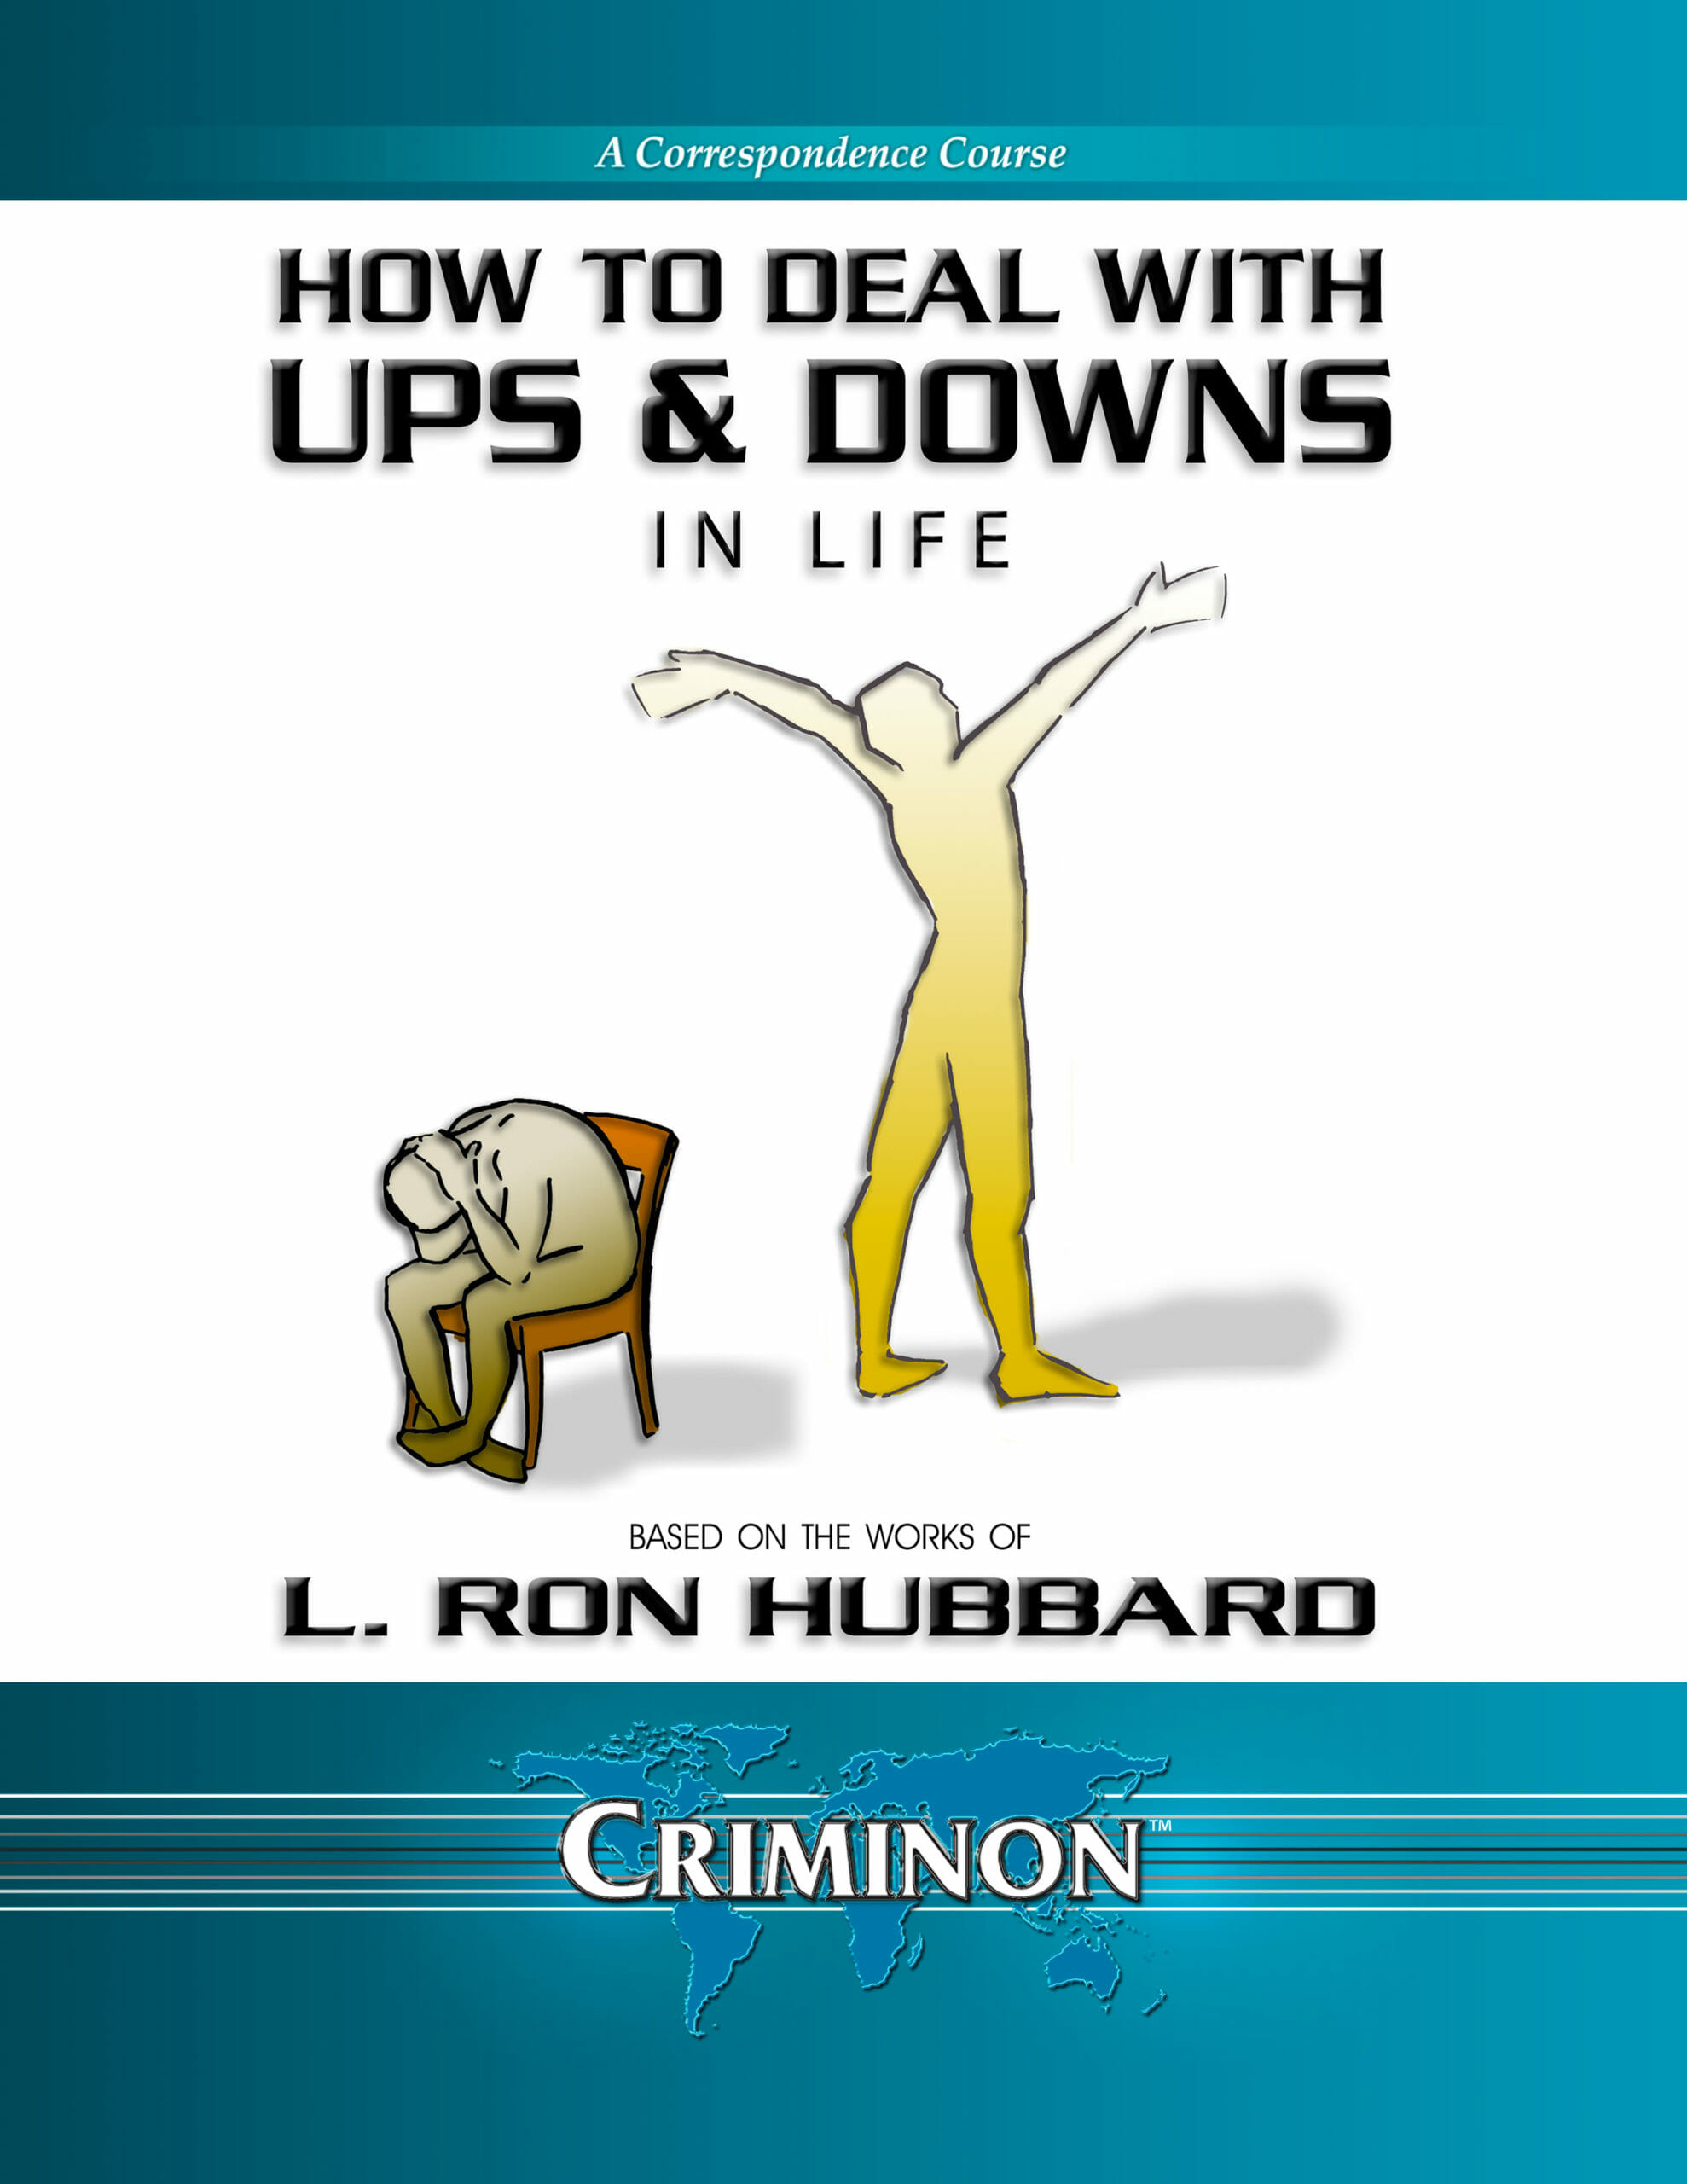 How to Deal With Ups and Downs in Life Course - Criminon